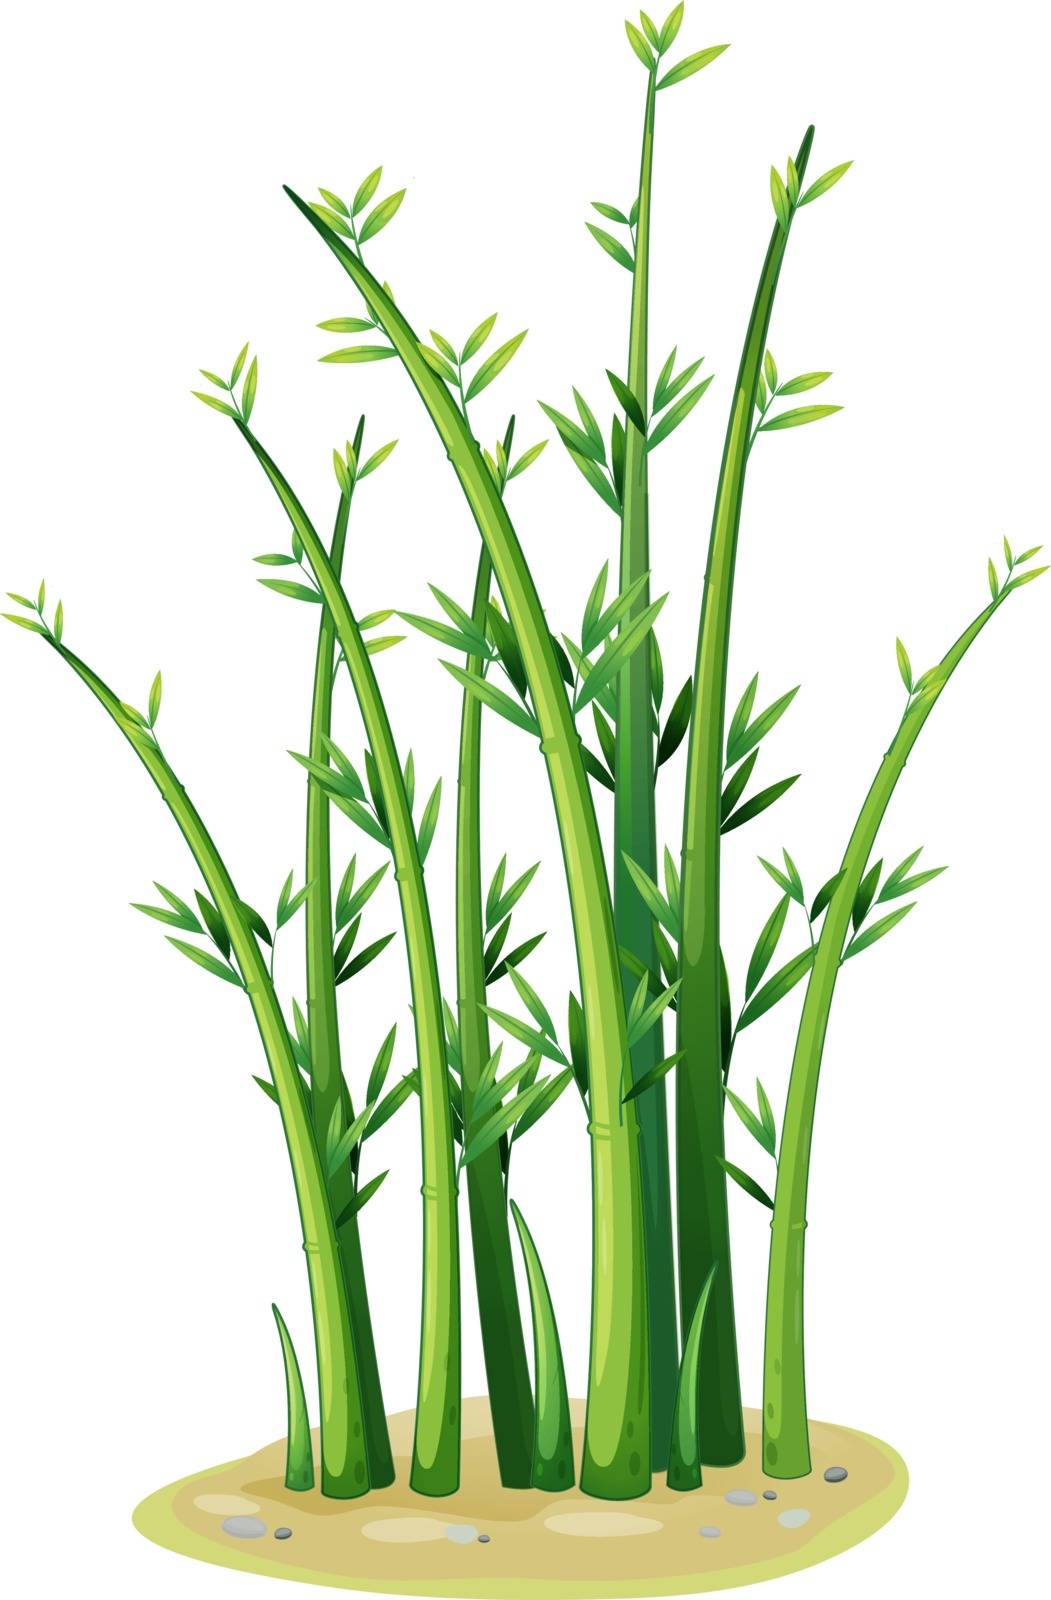 Illustration of a clump of bamboo